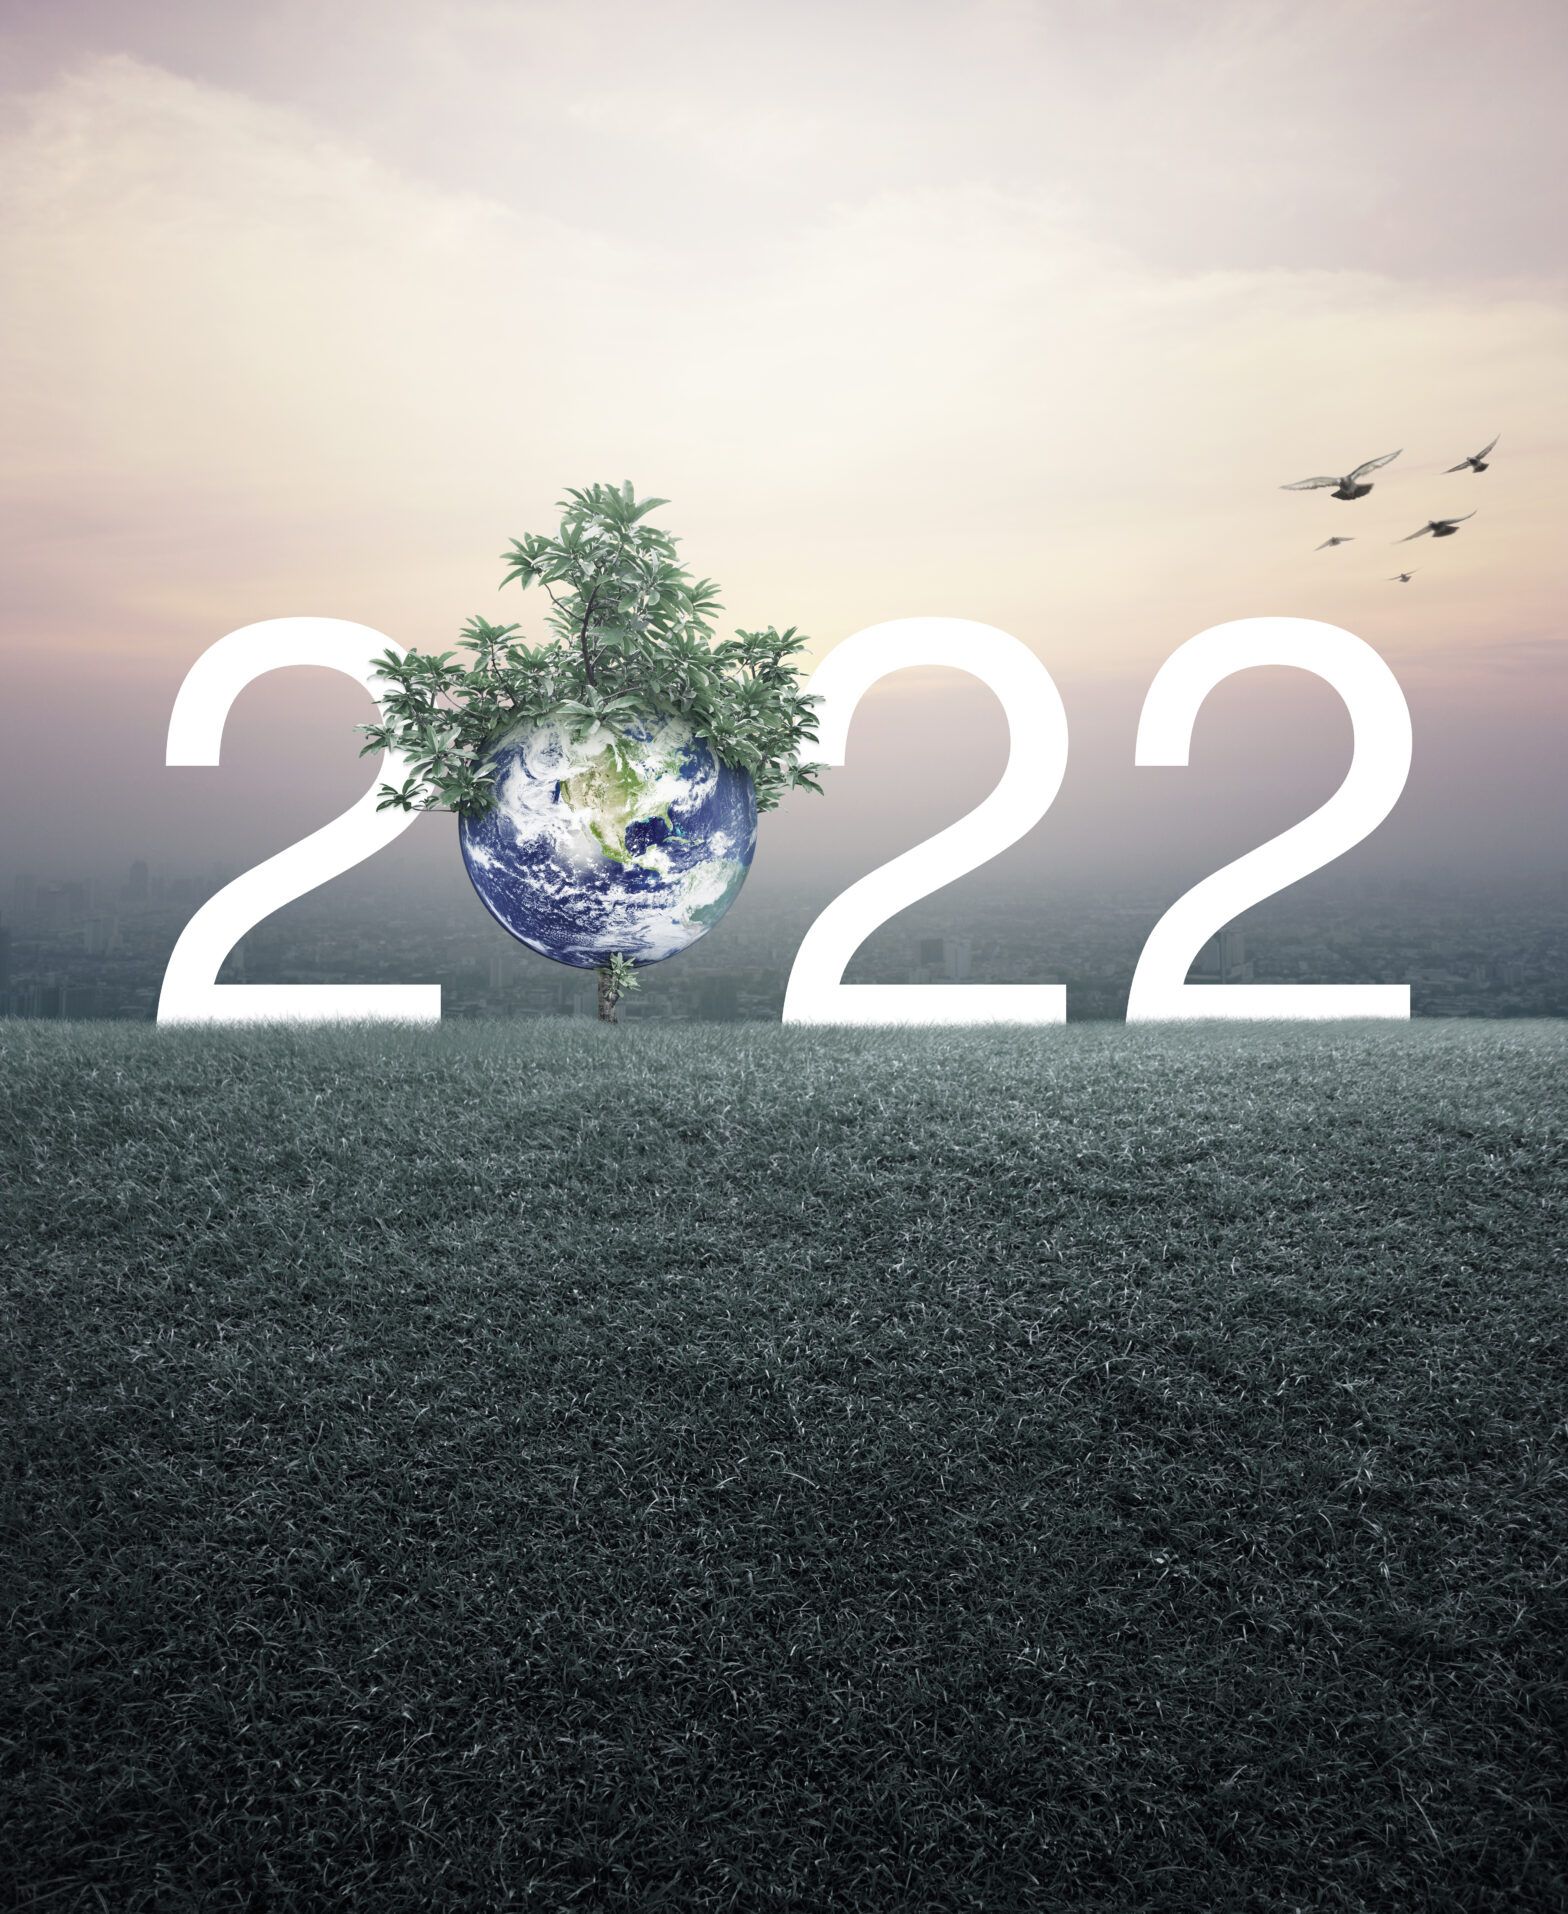 2022 resolutions and predictions part 2: Food waste, jargon and UK leadership